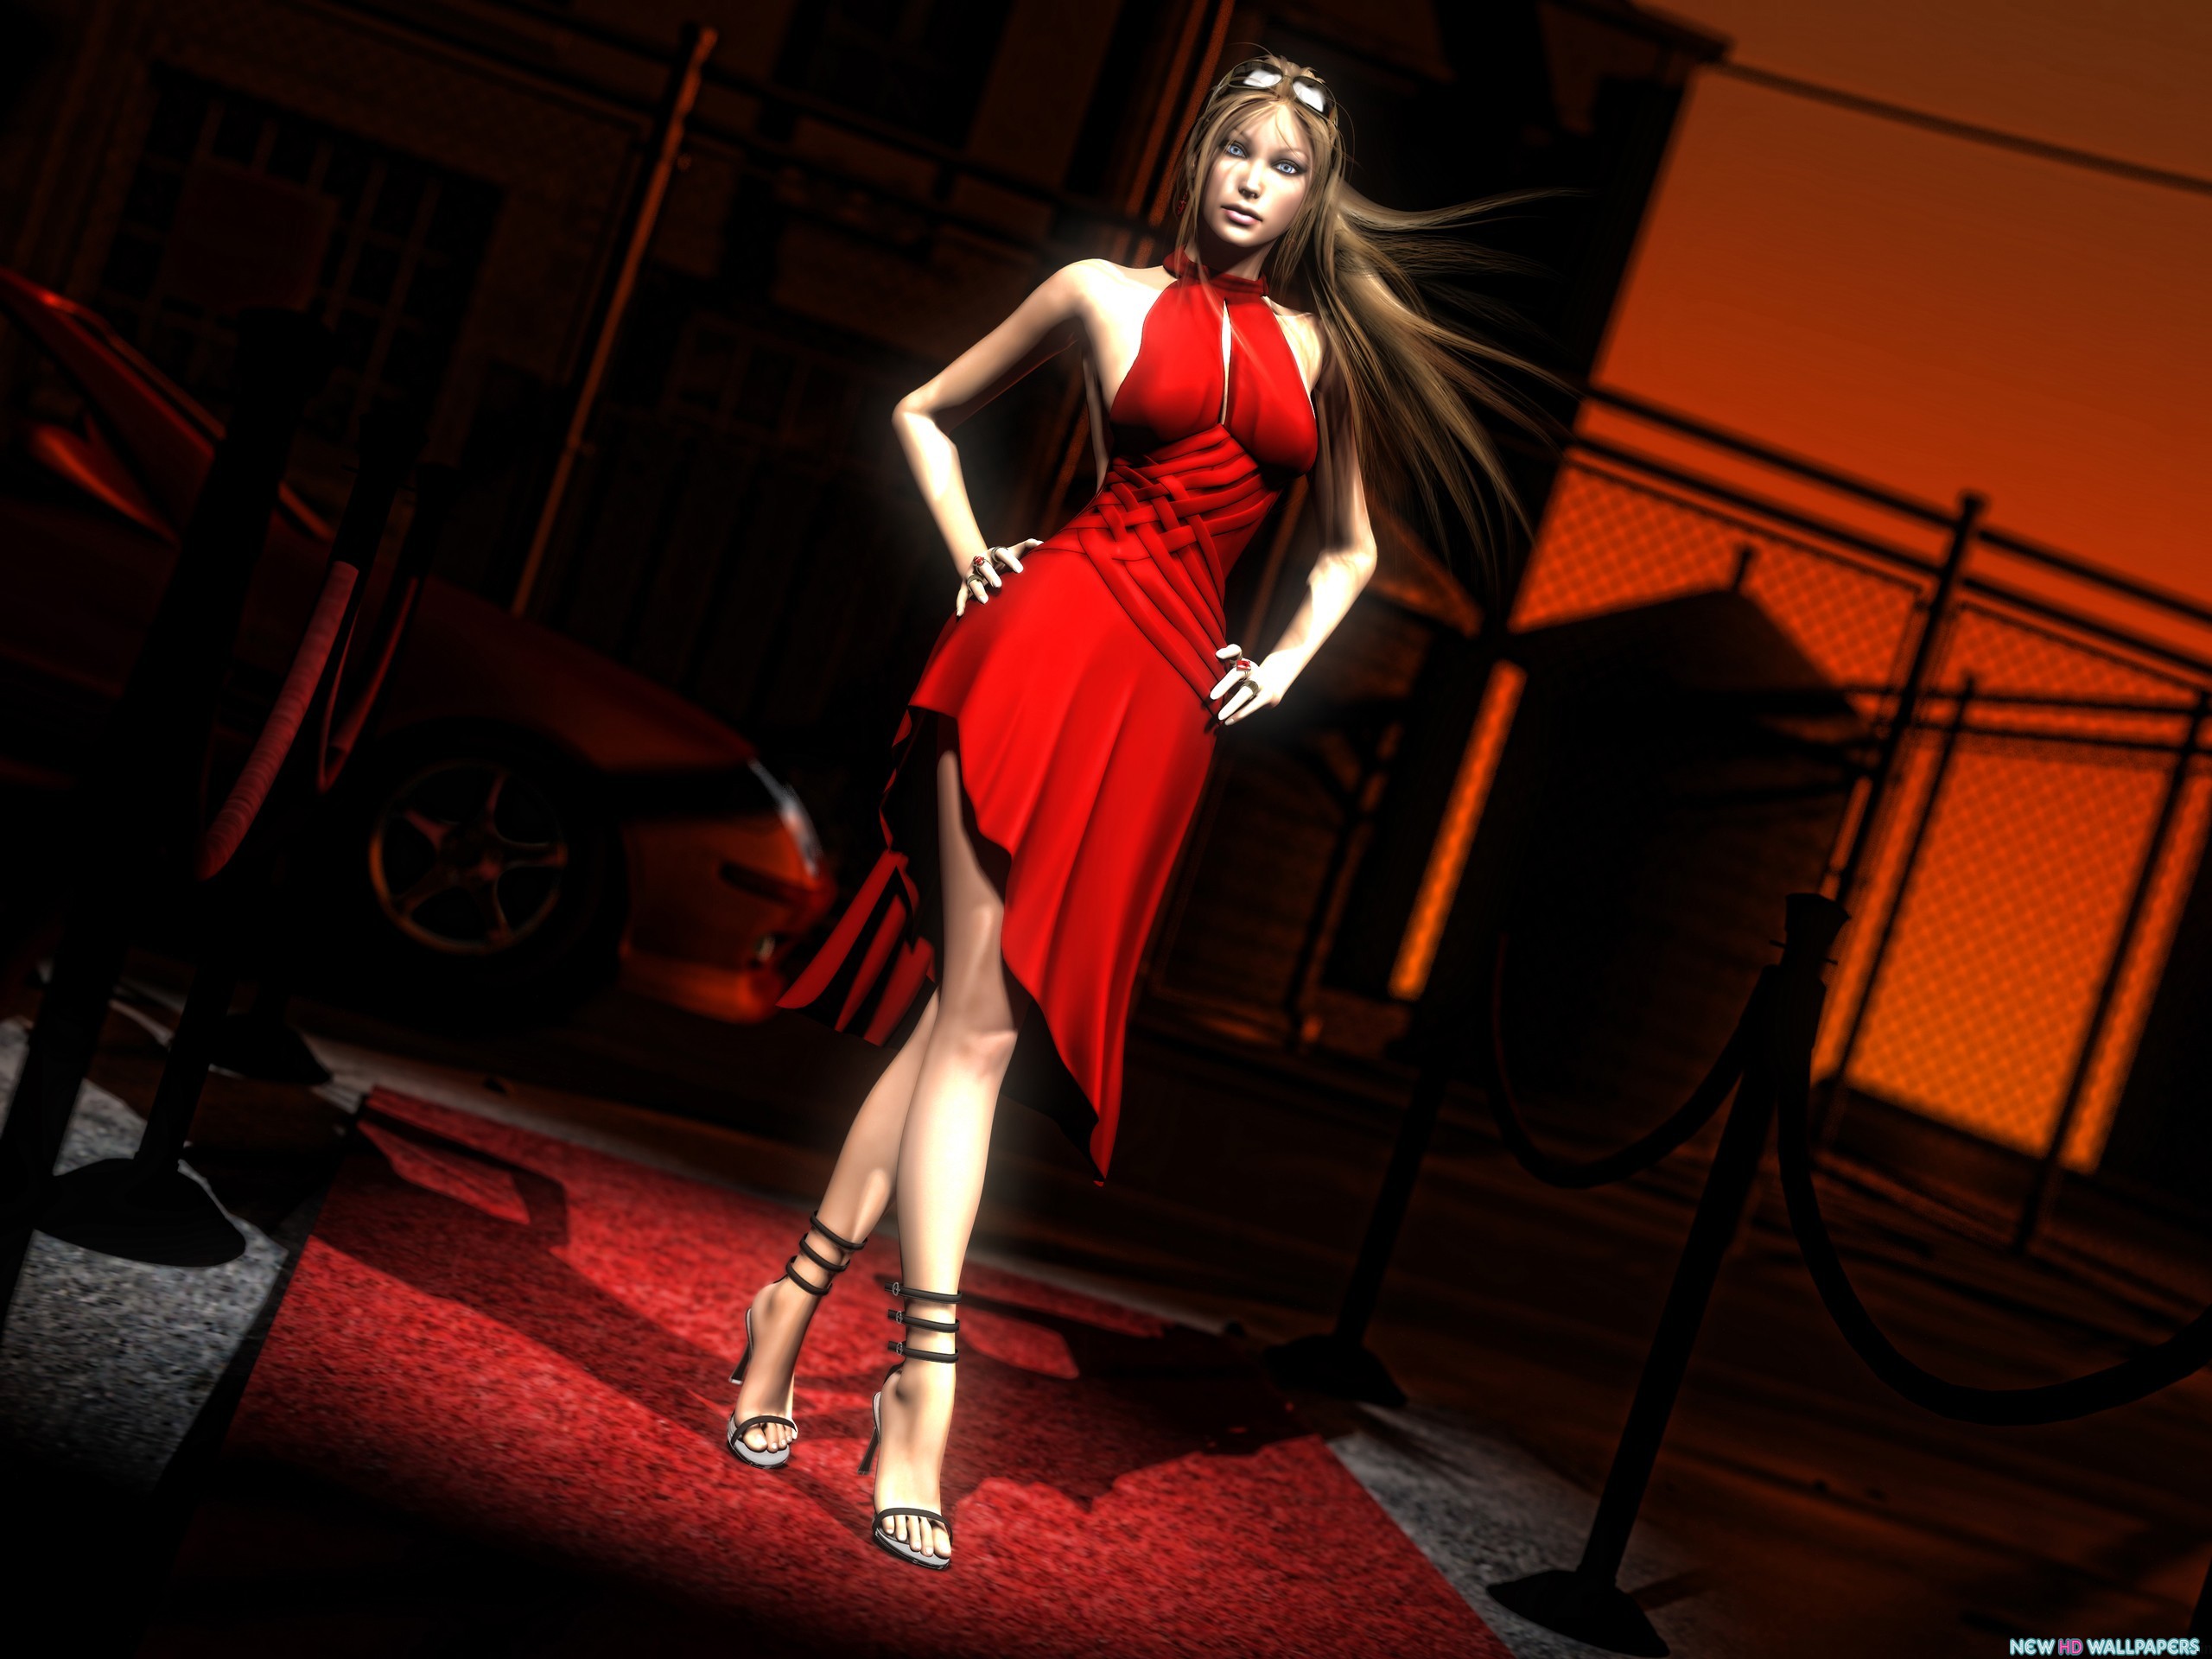 Download Anime Girl Red Dress on Ramp wallpaper in People wallpapers 2560x1920